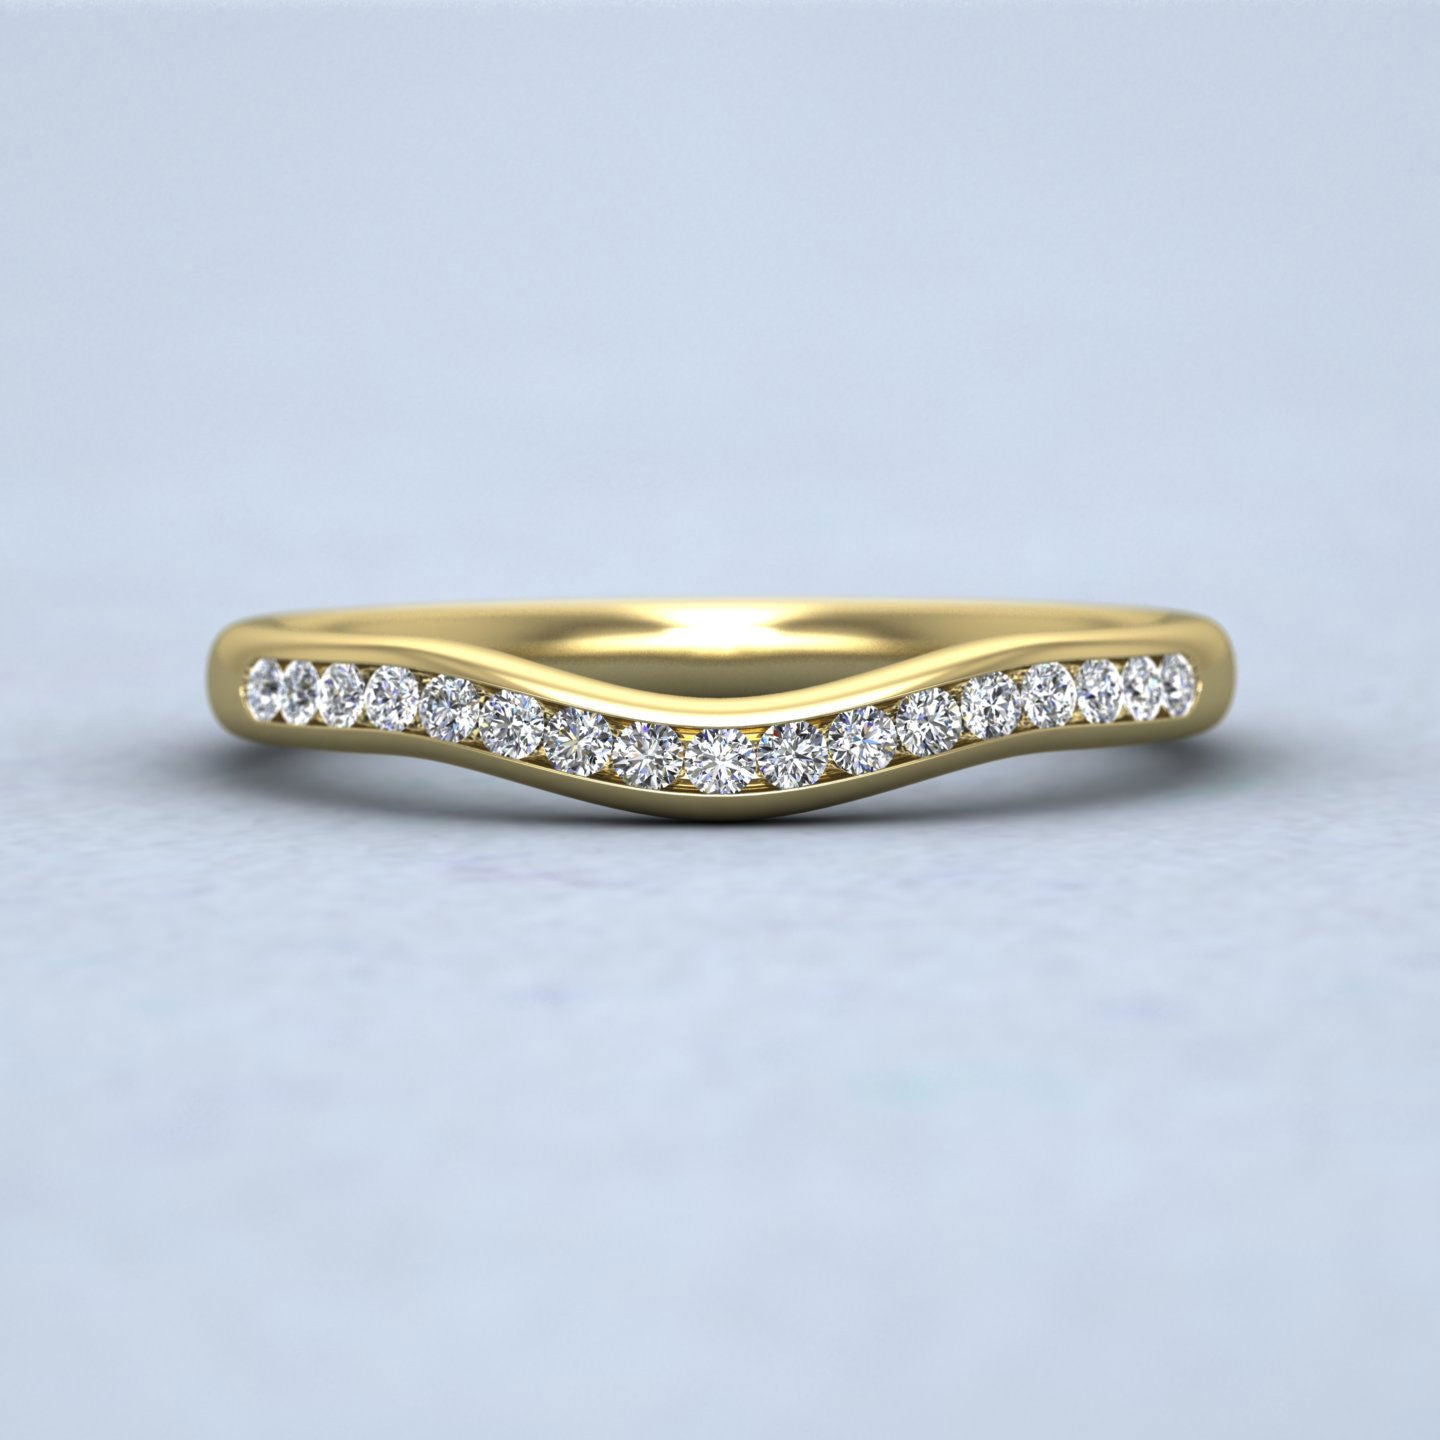 Curved To Fit Channel Set Diamond Wedding Ring In 9ct Yellow Gold 2.25mm Wide